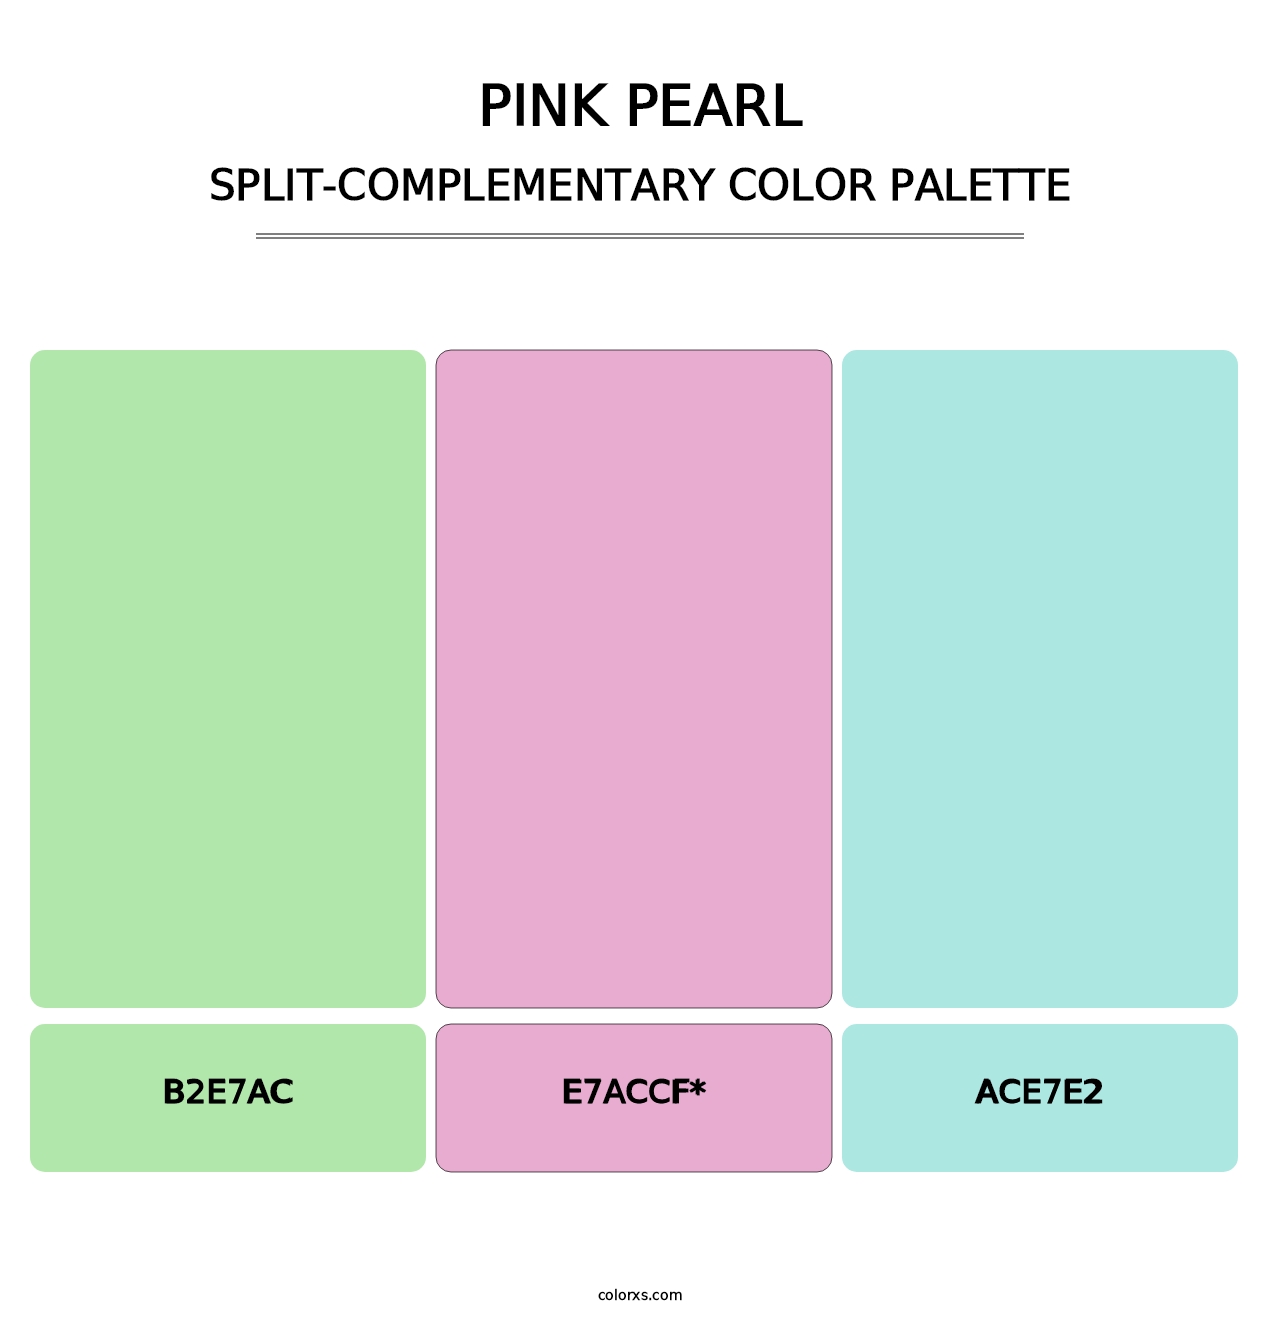 Pink Pearl - Split-Complementary Color Palette